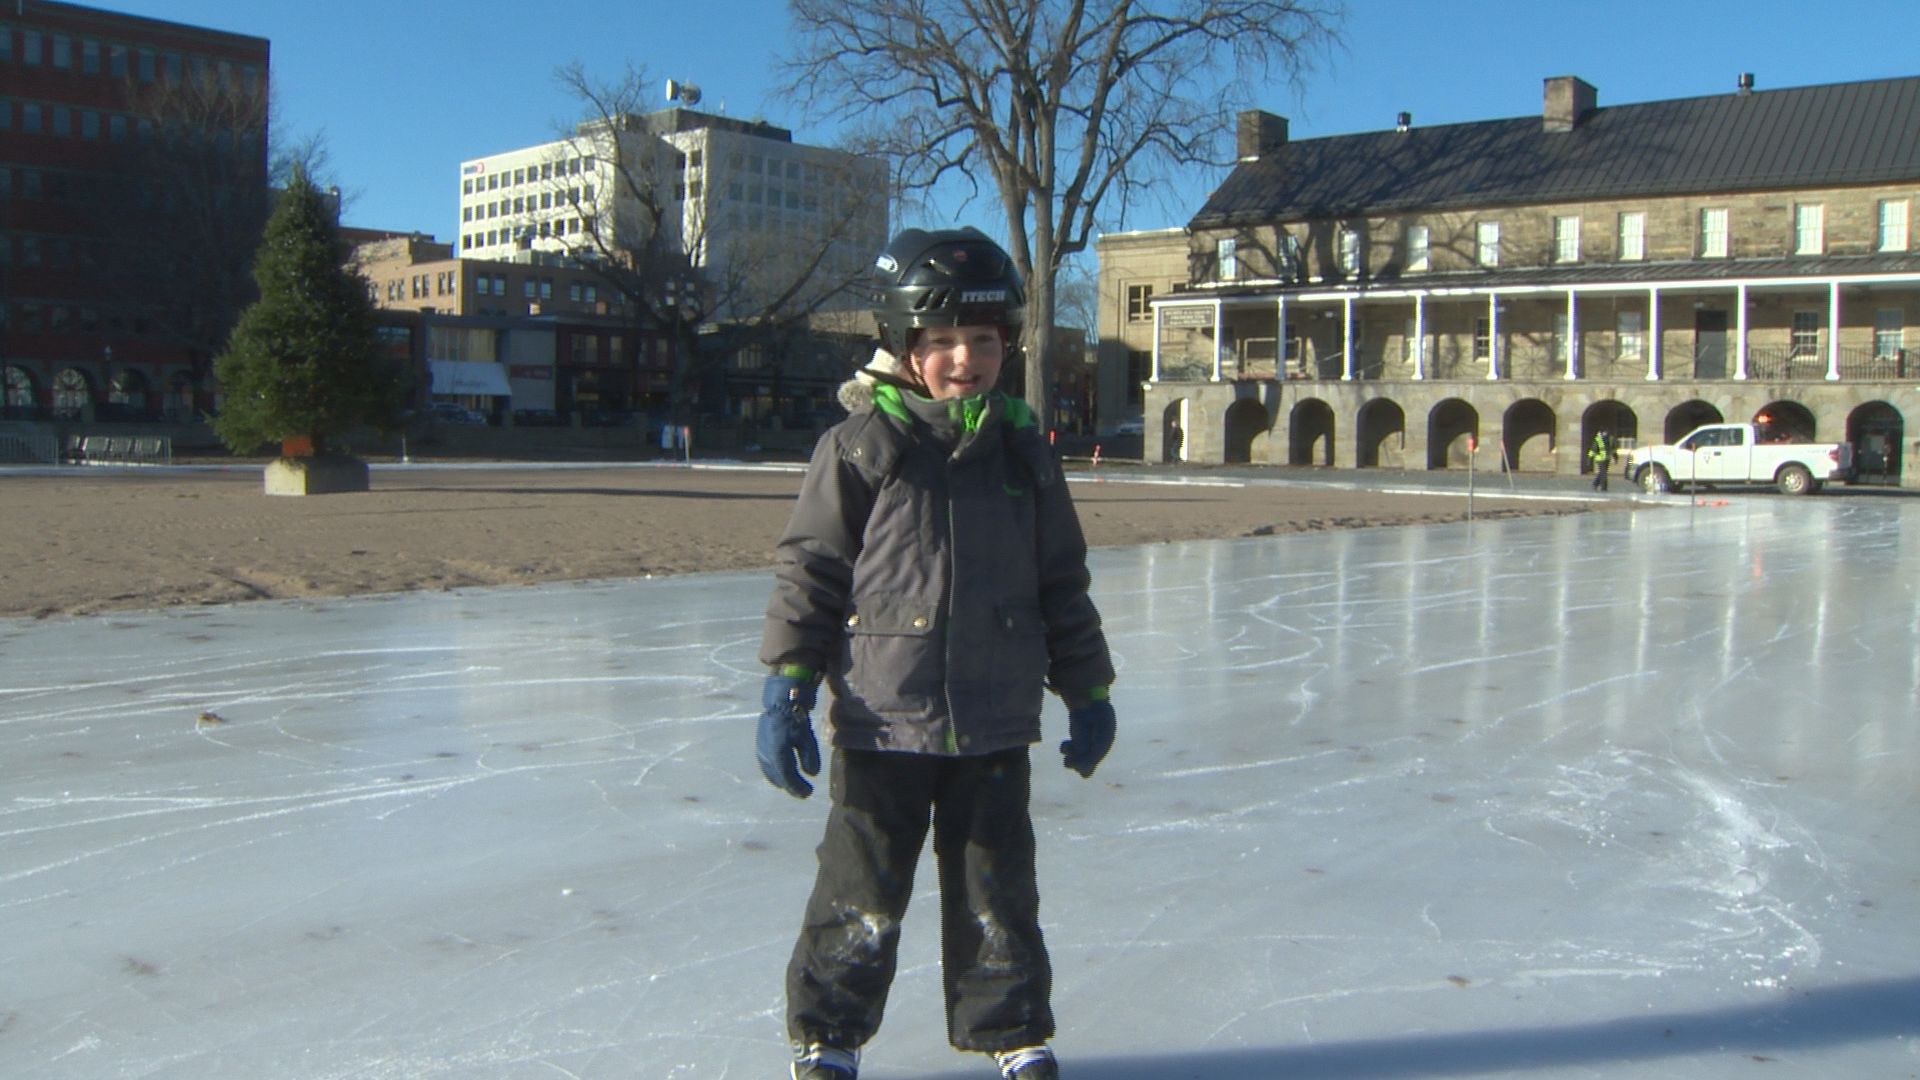 New skating rink opens in downtown Fredericton’s Officers’ Square